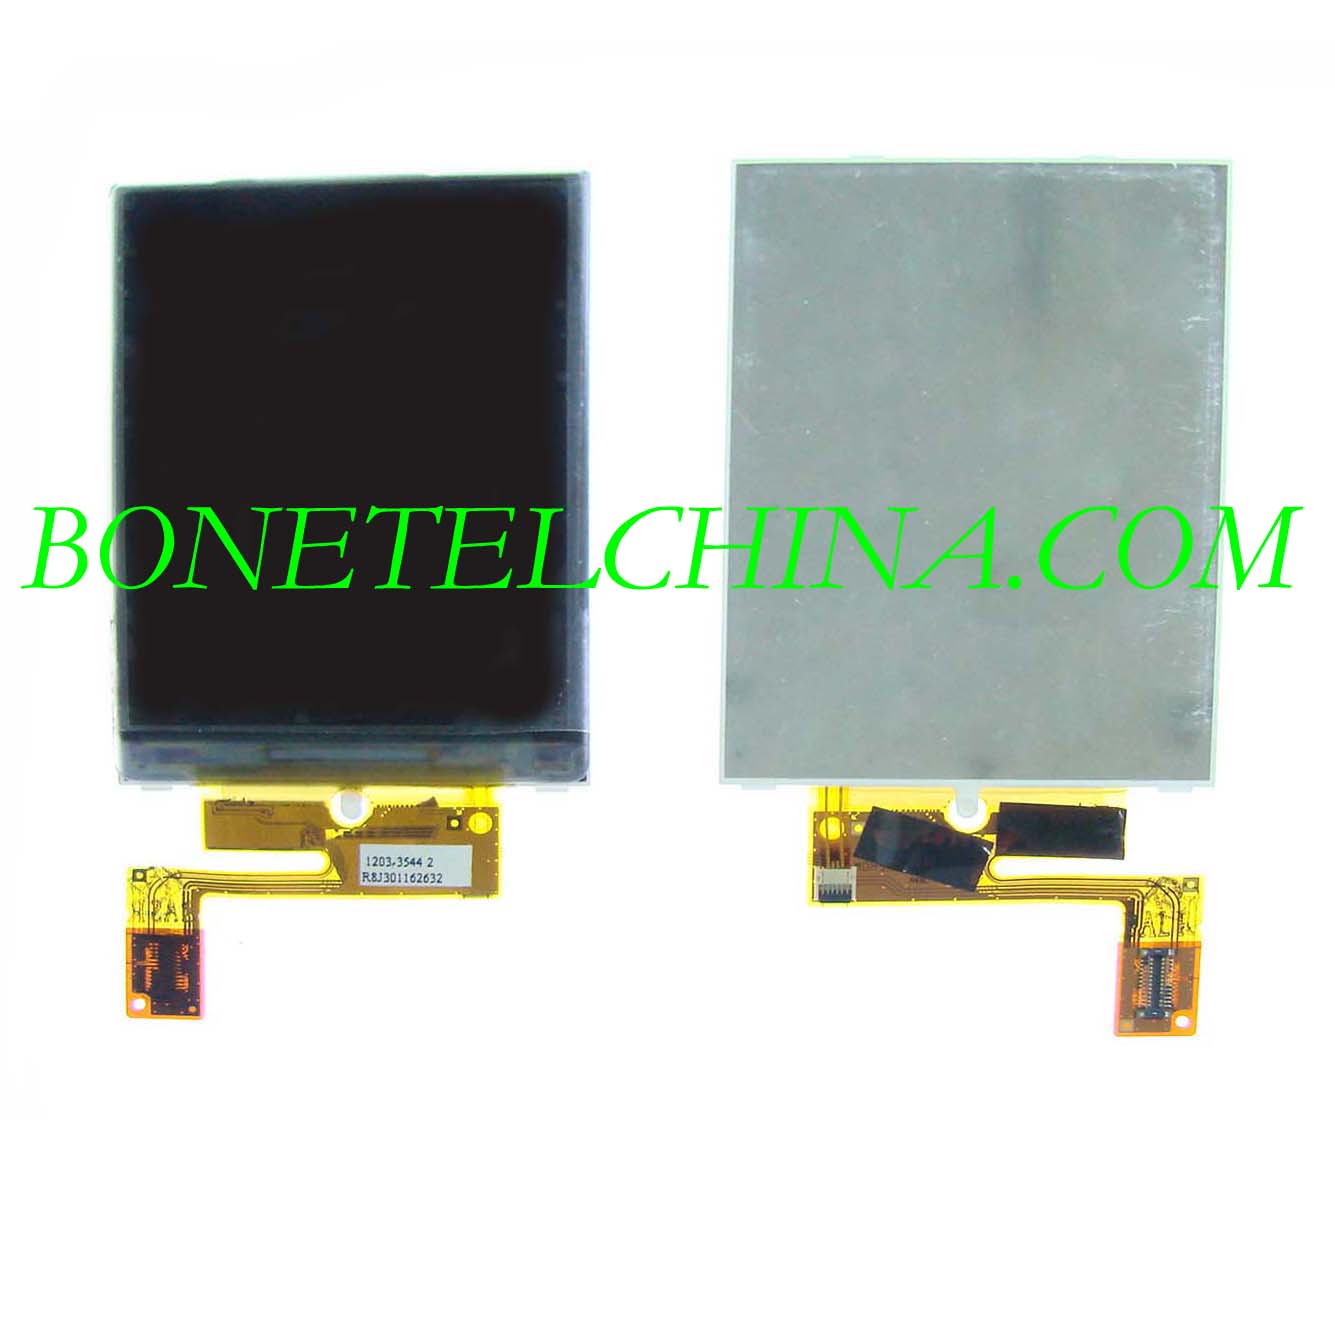 C905 LCD for Sony Ericsson